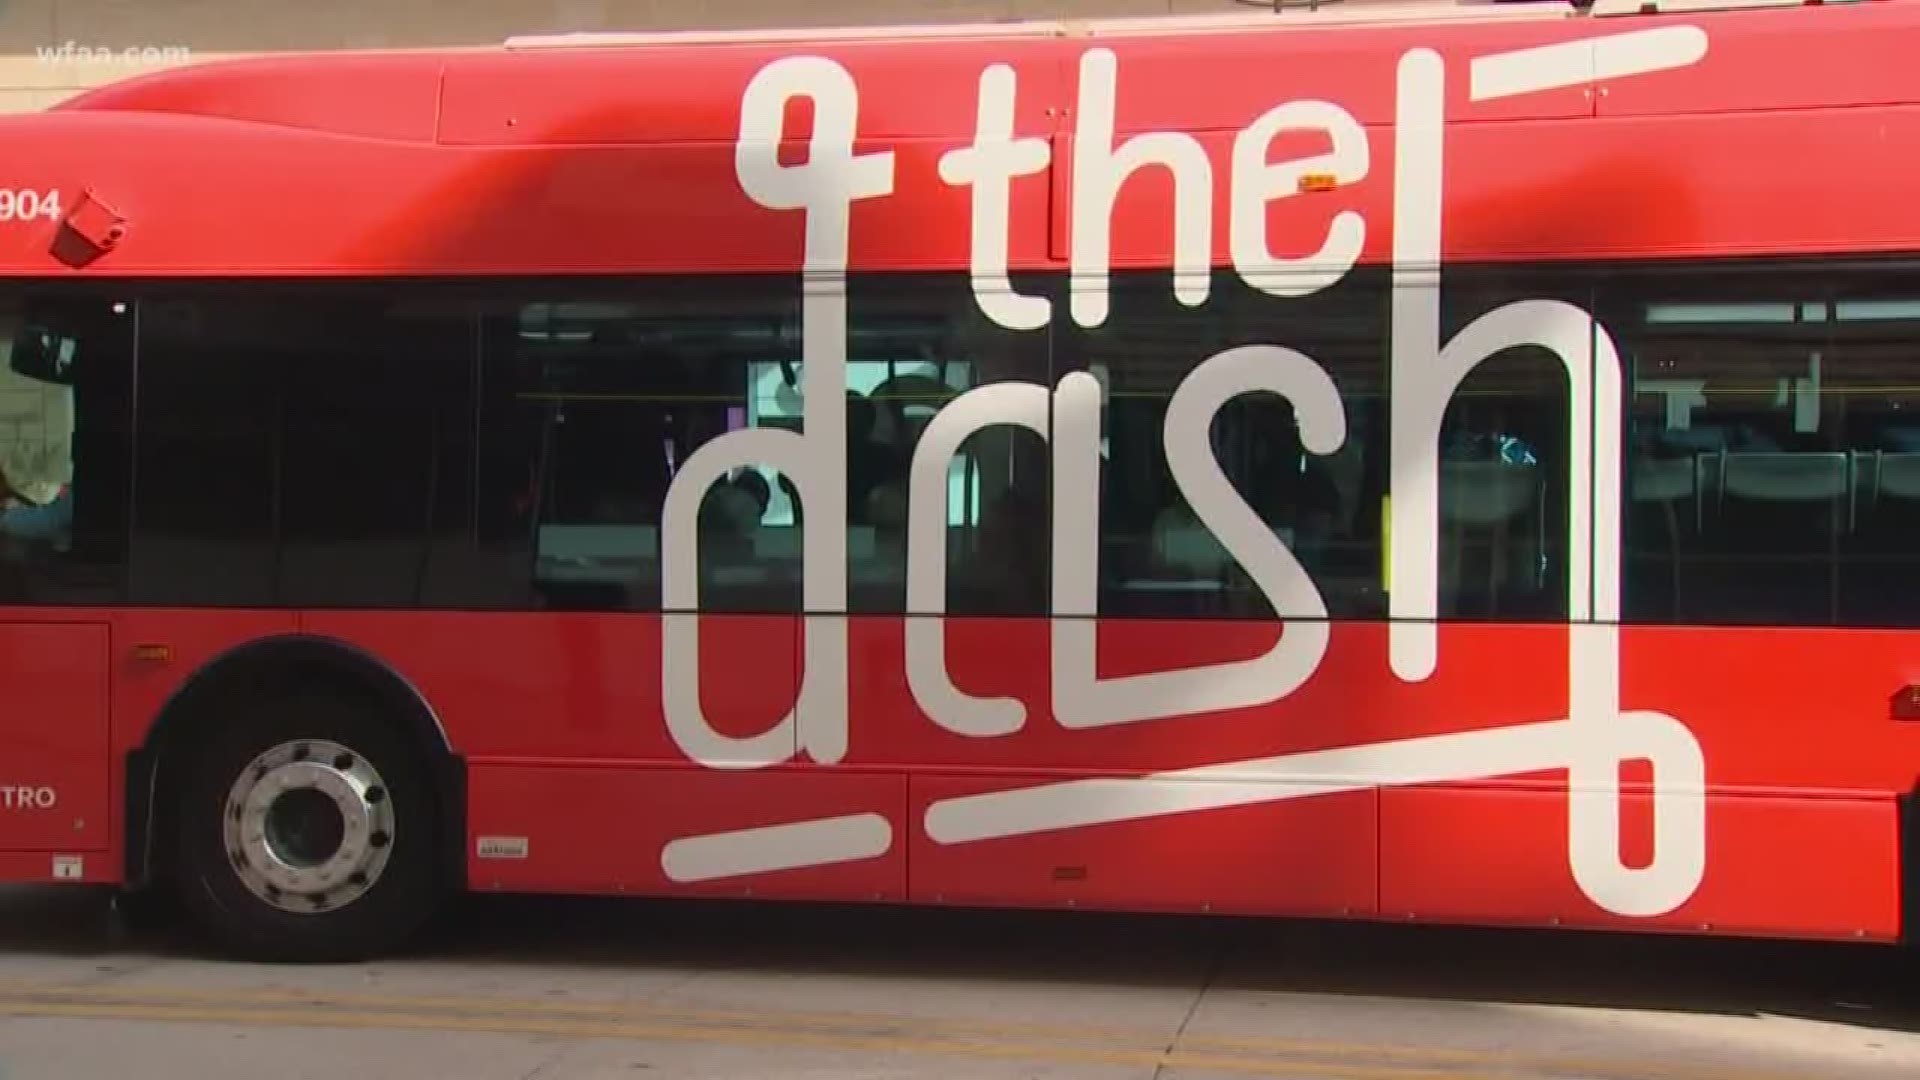 The Dash started running this week and will be free for riders until the end of October